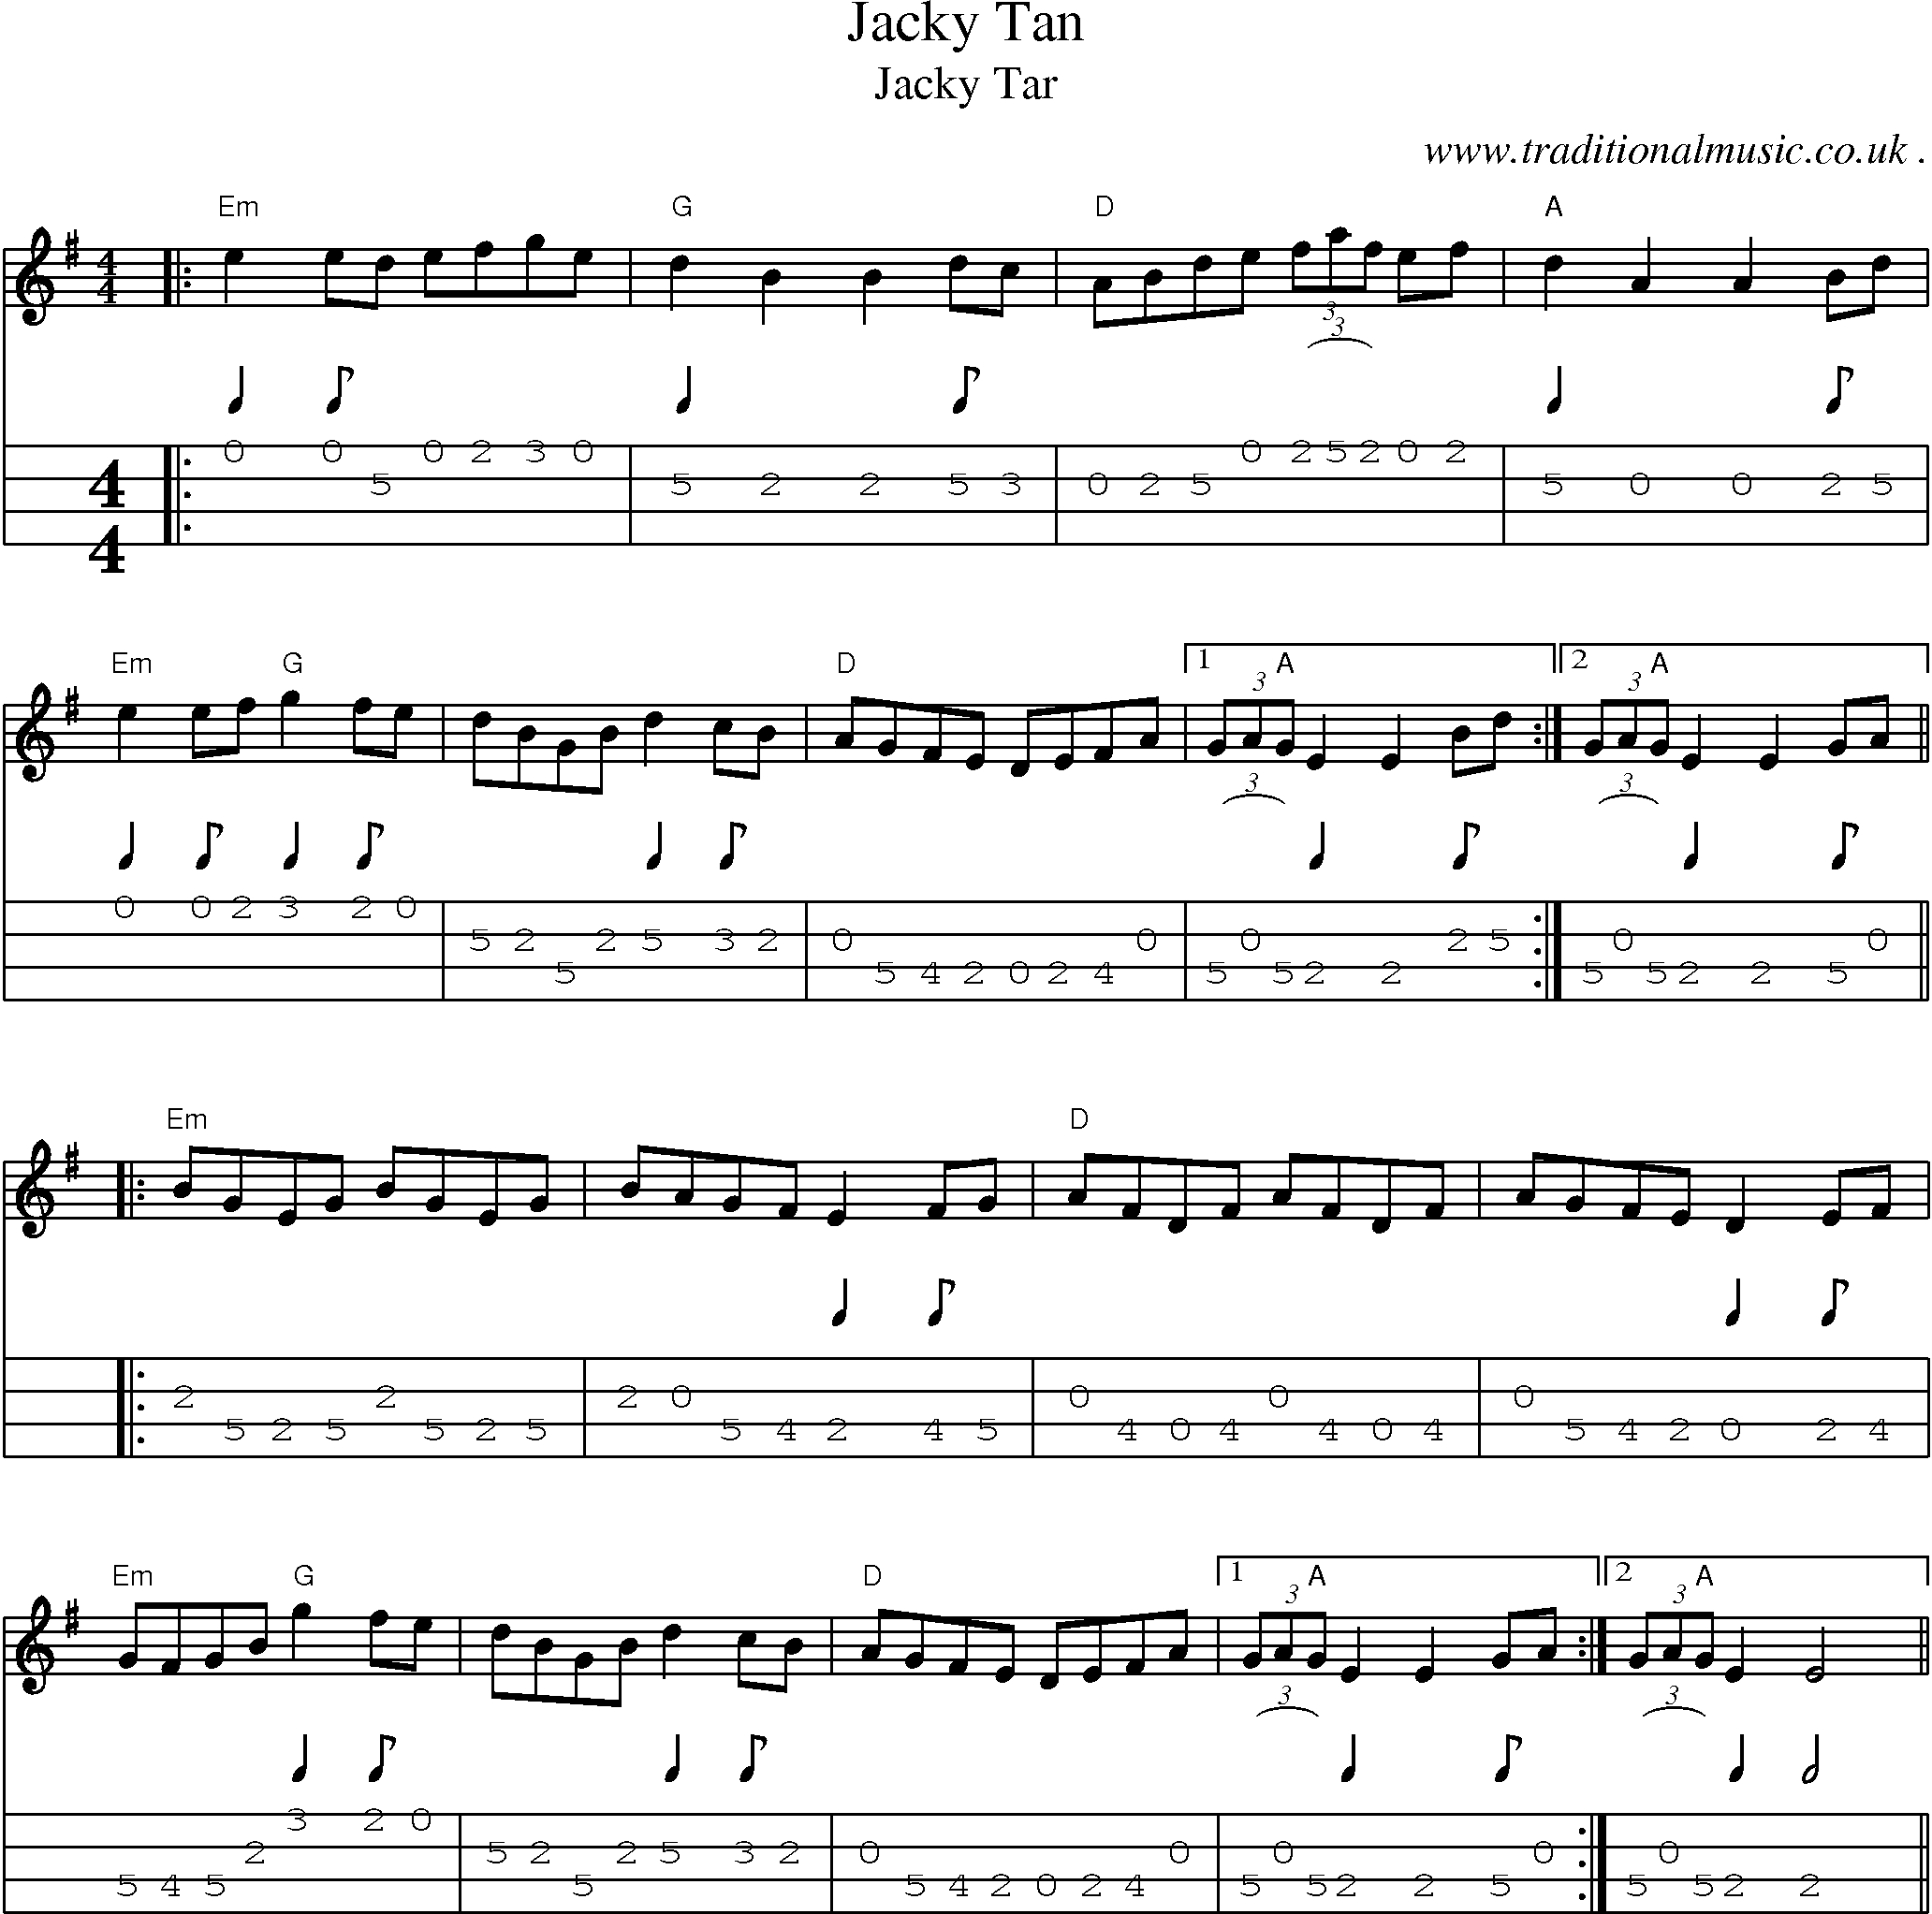 Music Score and Guitar Tabs for Jacky Tan